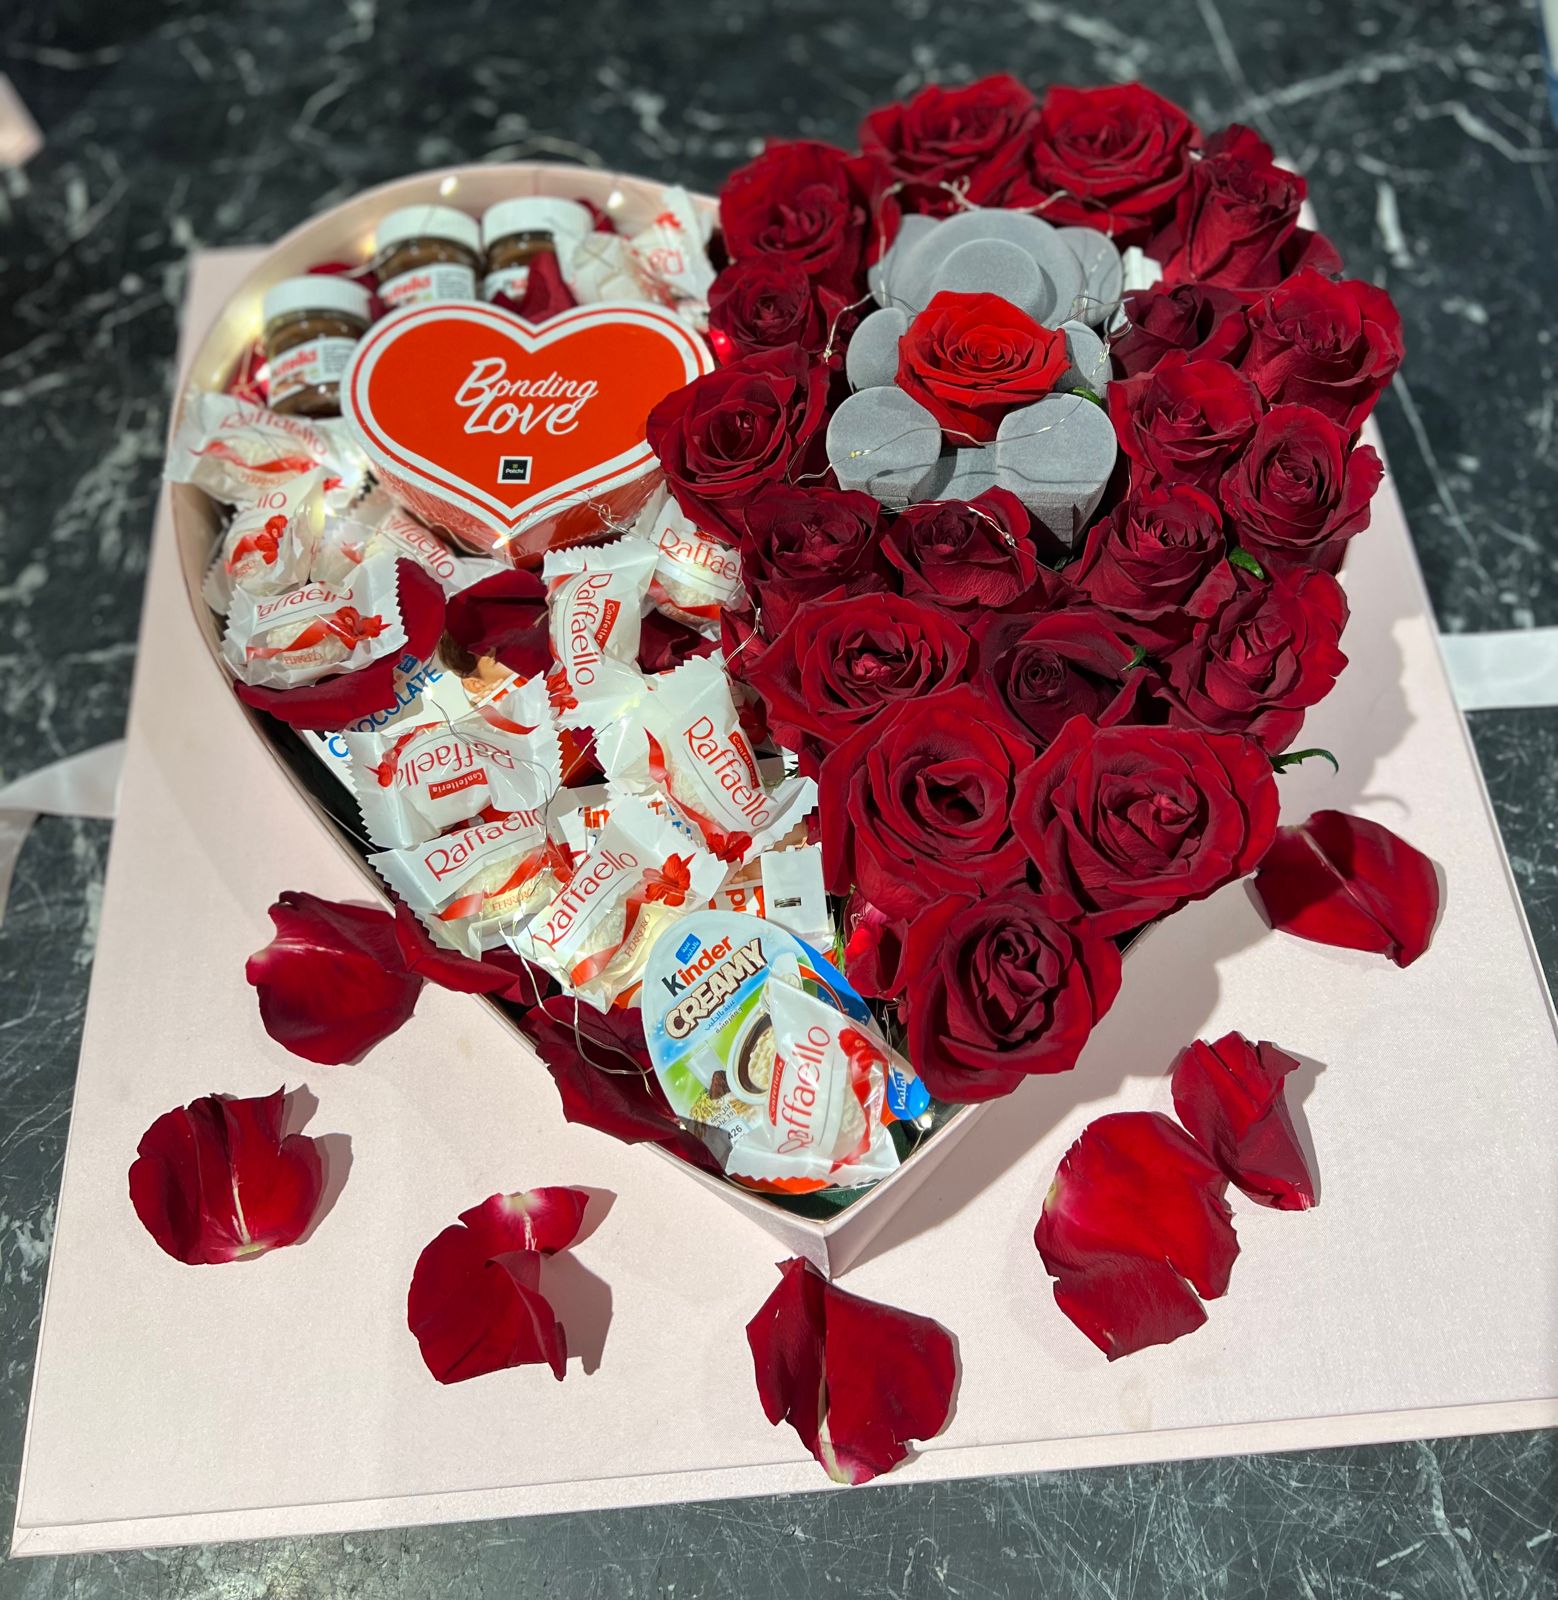 Big Heart Chocolate & Flowers with Forever Rose